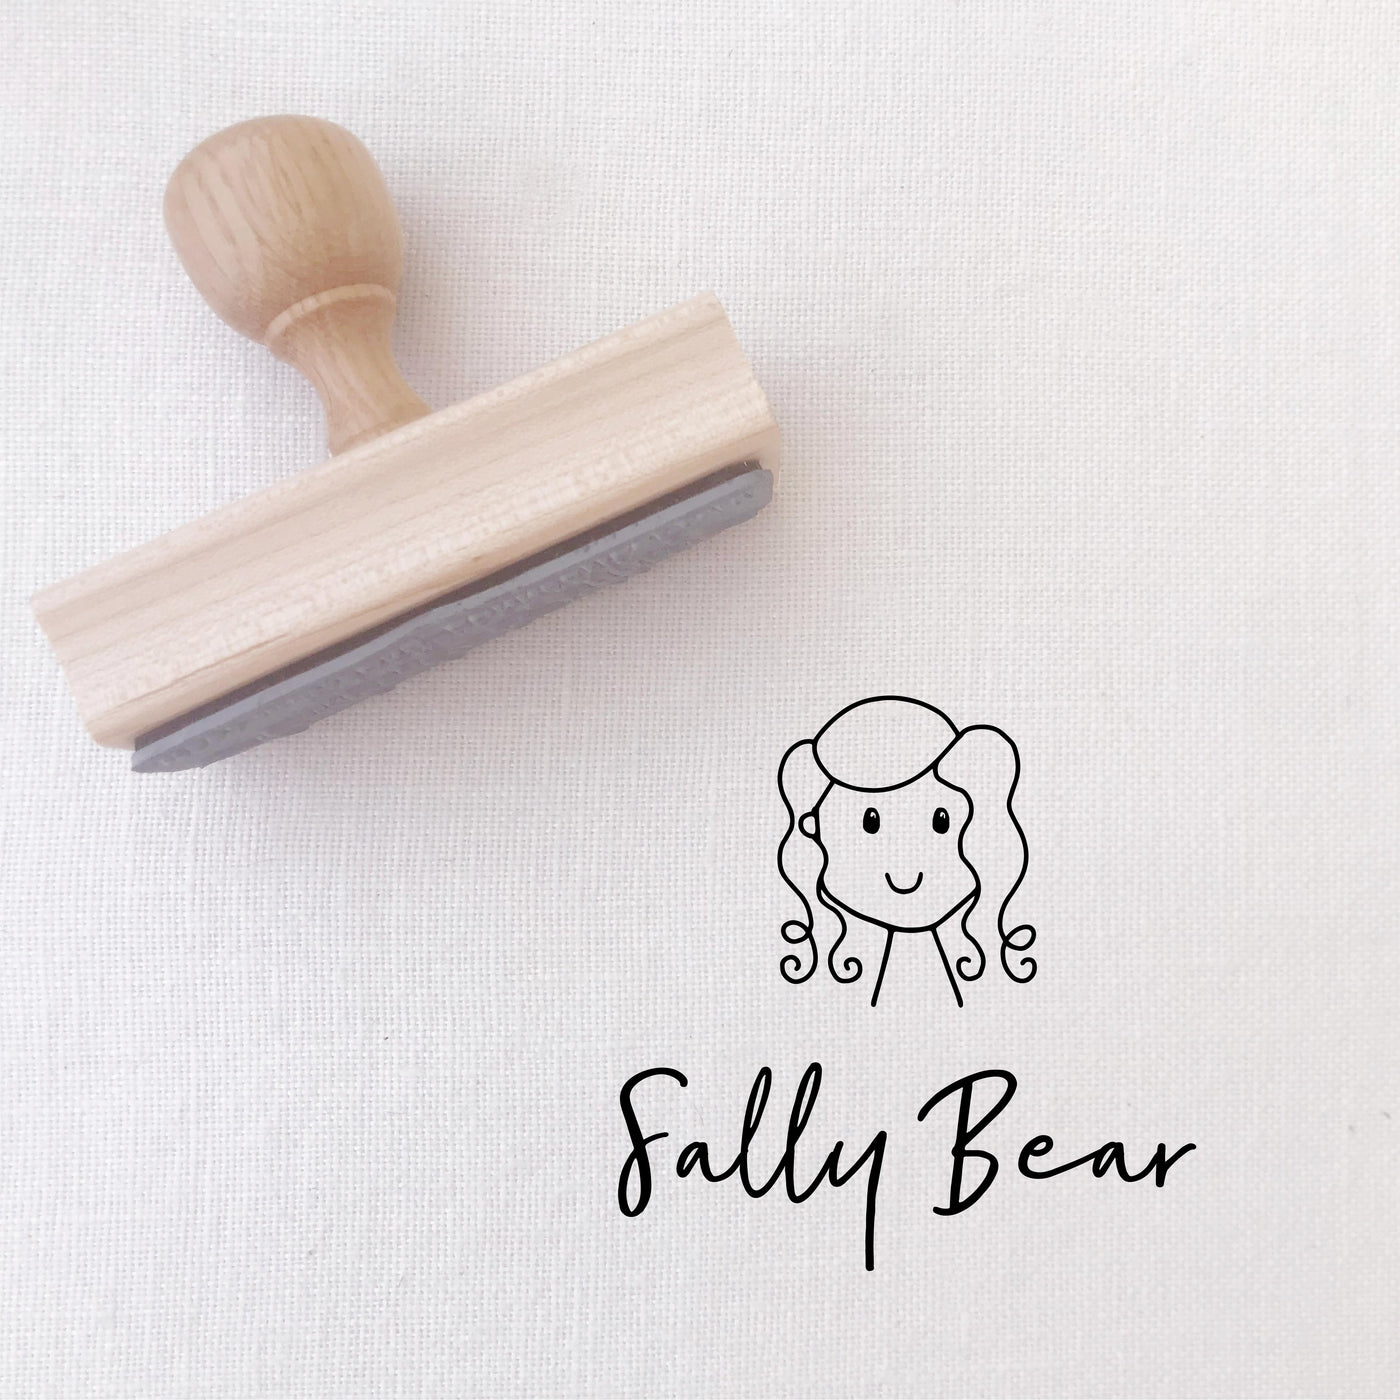 Childrens Character Name Rubber Stamp for Kid Artist Gift | Custom Character Stamp | Heirloom Seals